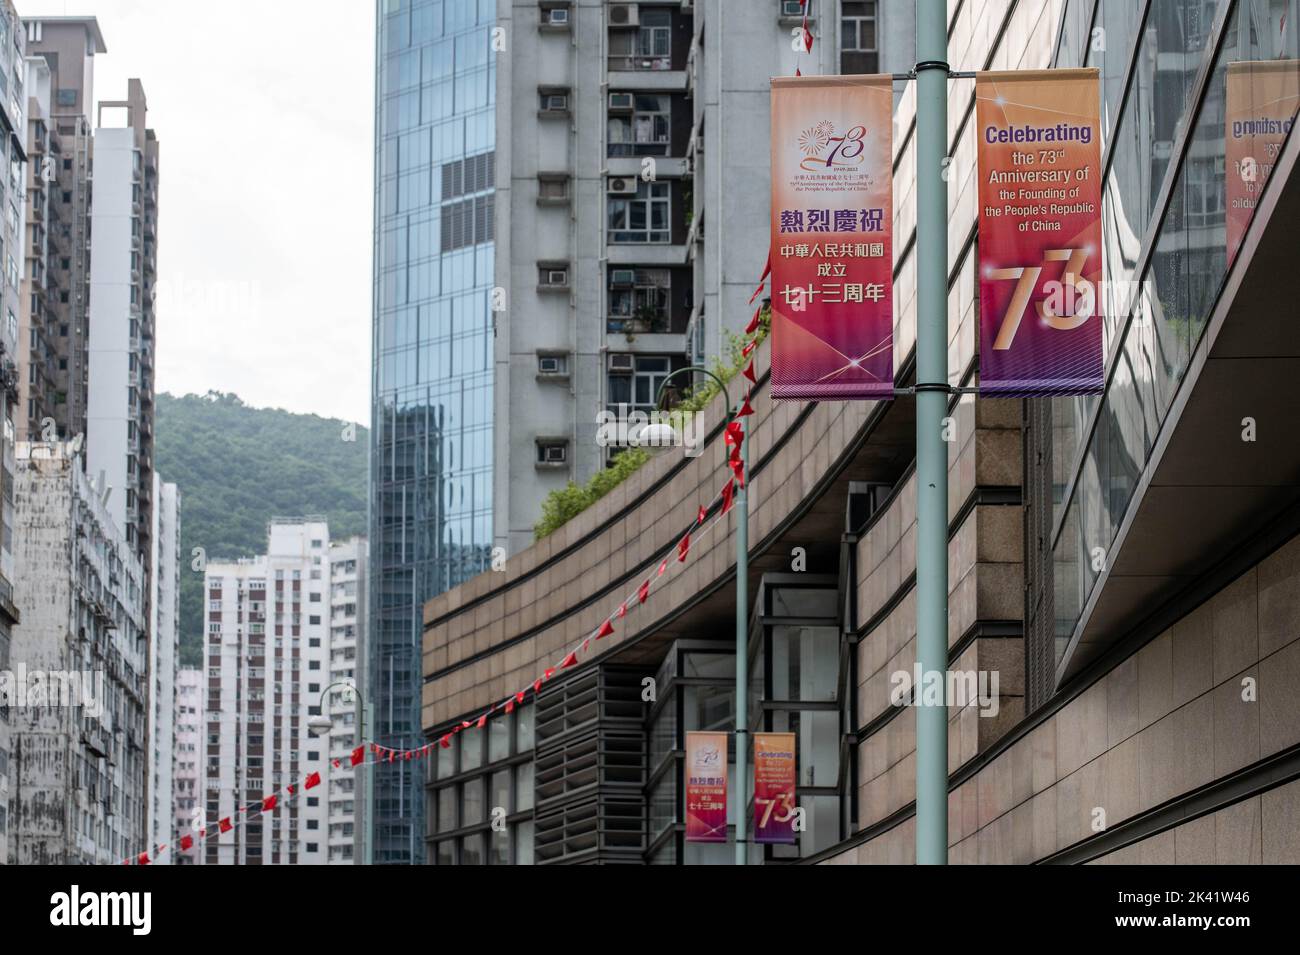 A newly-placed banner and flags hang on a quiet commercial street on Hong Kong Island. With no city-wide celebrations planned for China's National Day and police on high alert for protests, signs acknowledging the 73rd anniversary of the People's Republic of China are few and far between. Stock Photo